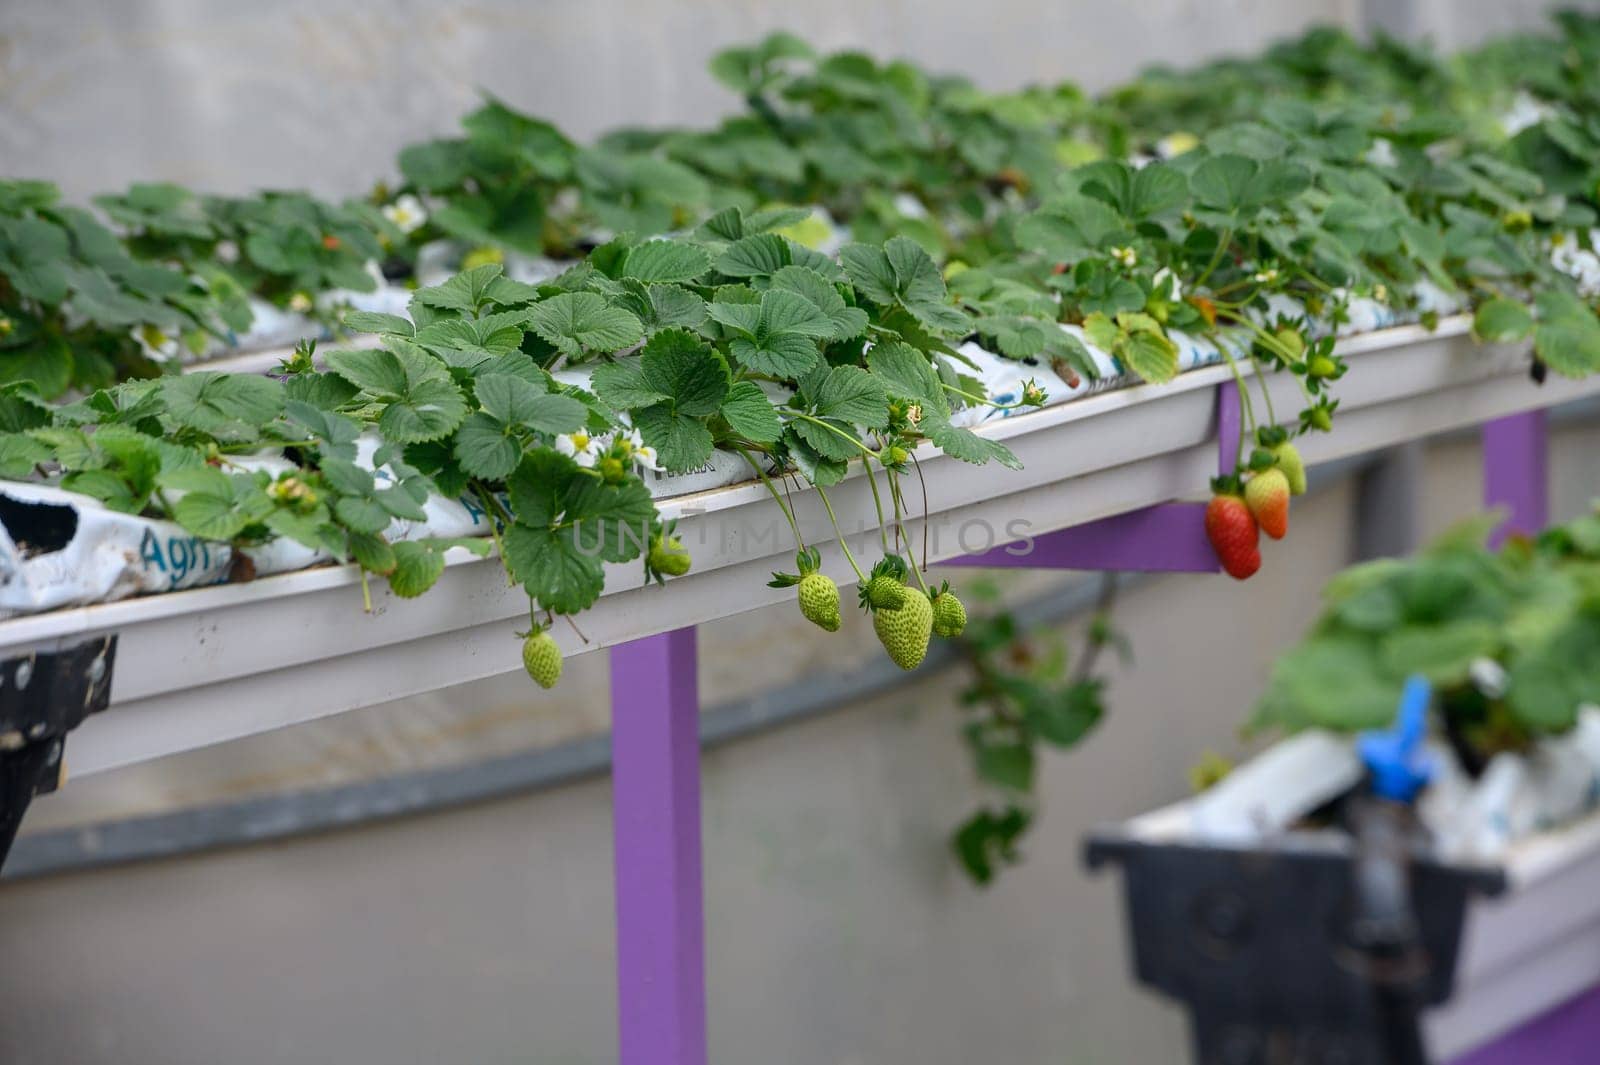 strawberries on hanging beds in a greenhouse 4